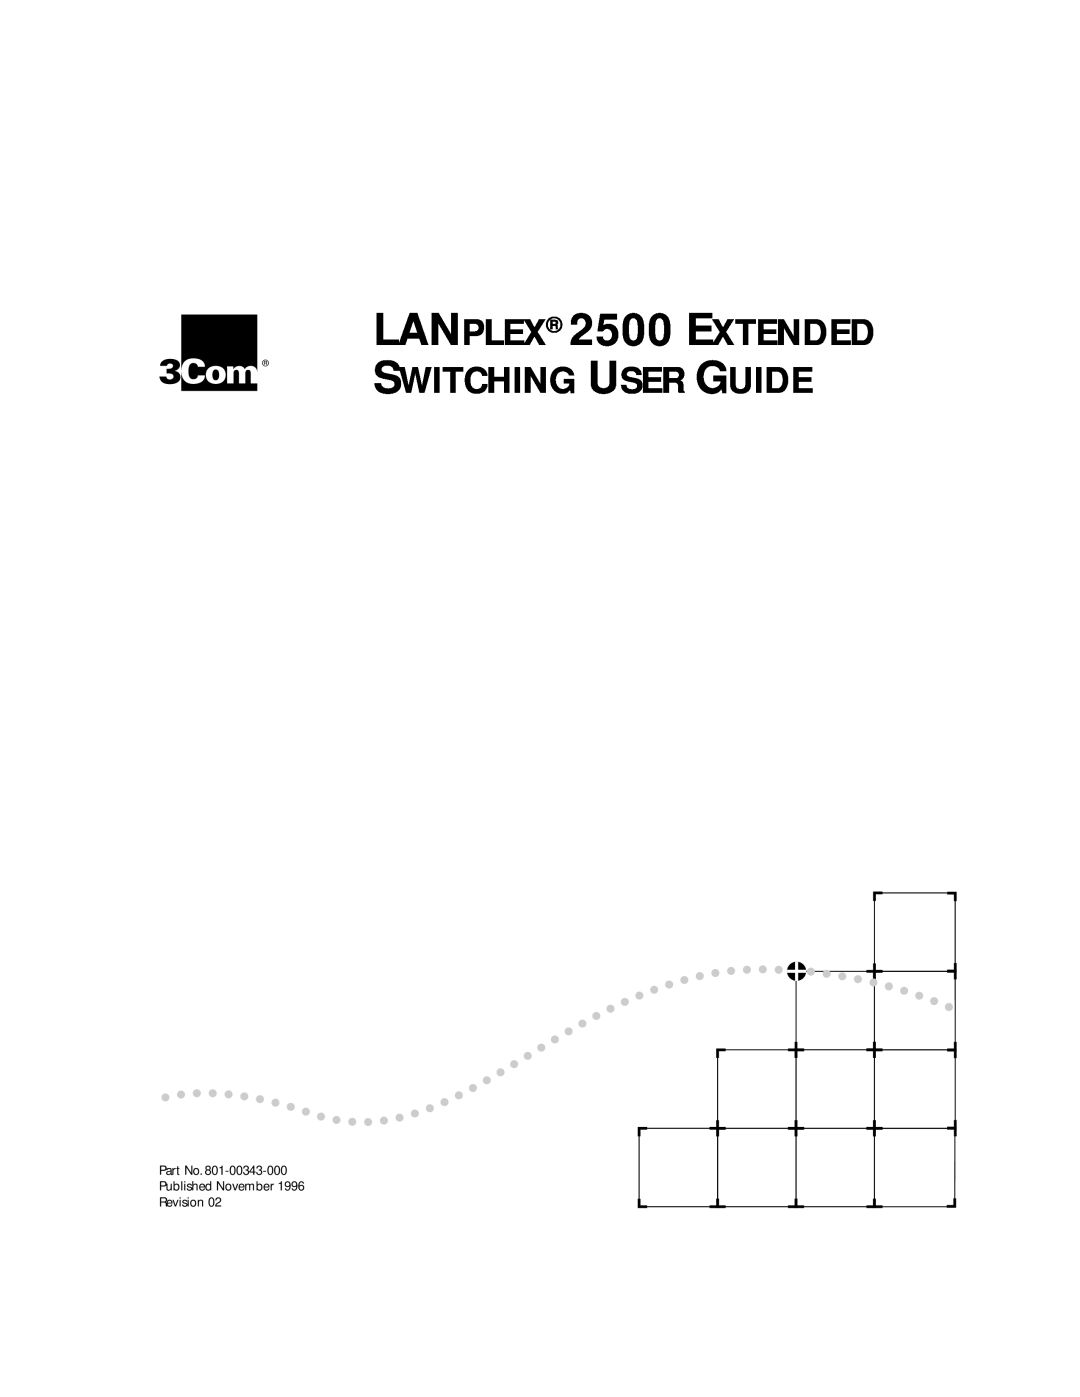 3Com manual LANPLEX 2500 EXTENDED, Switching User Guide, Published November Revision 